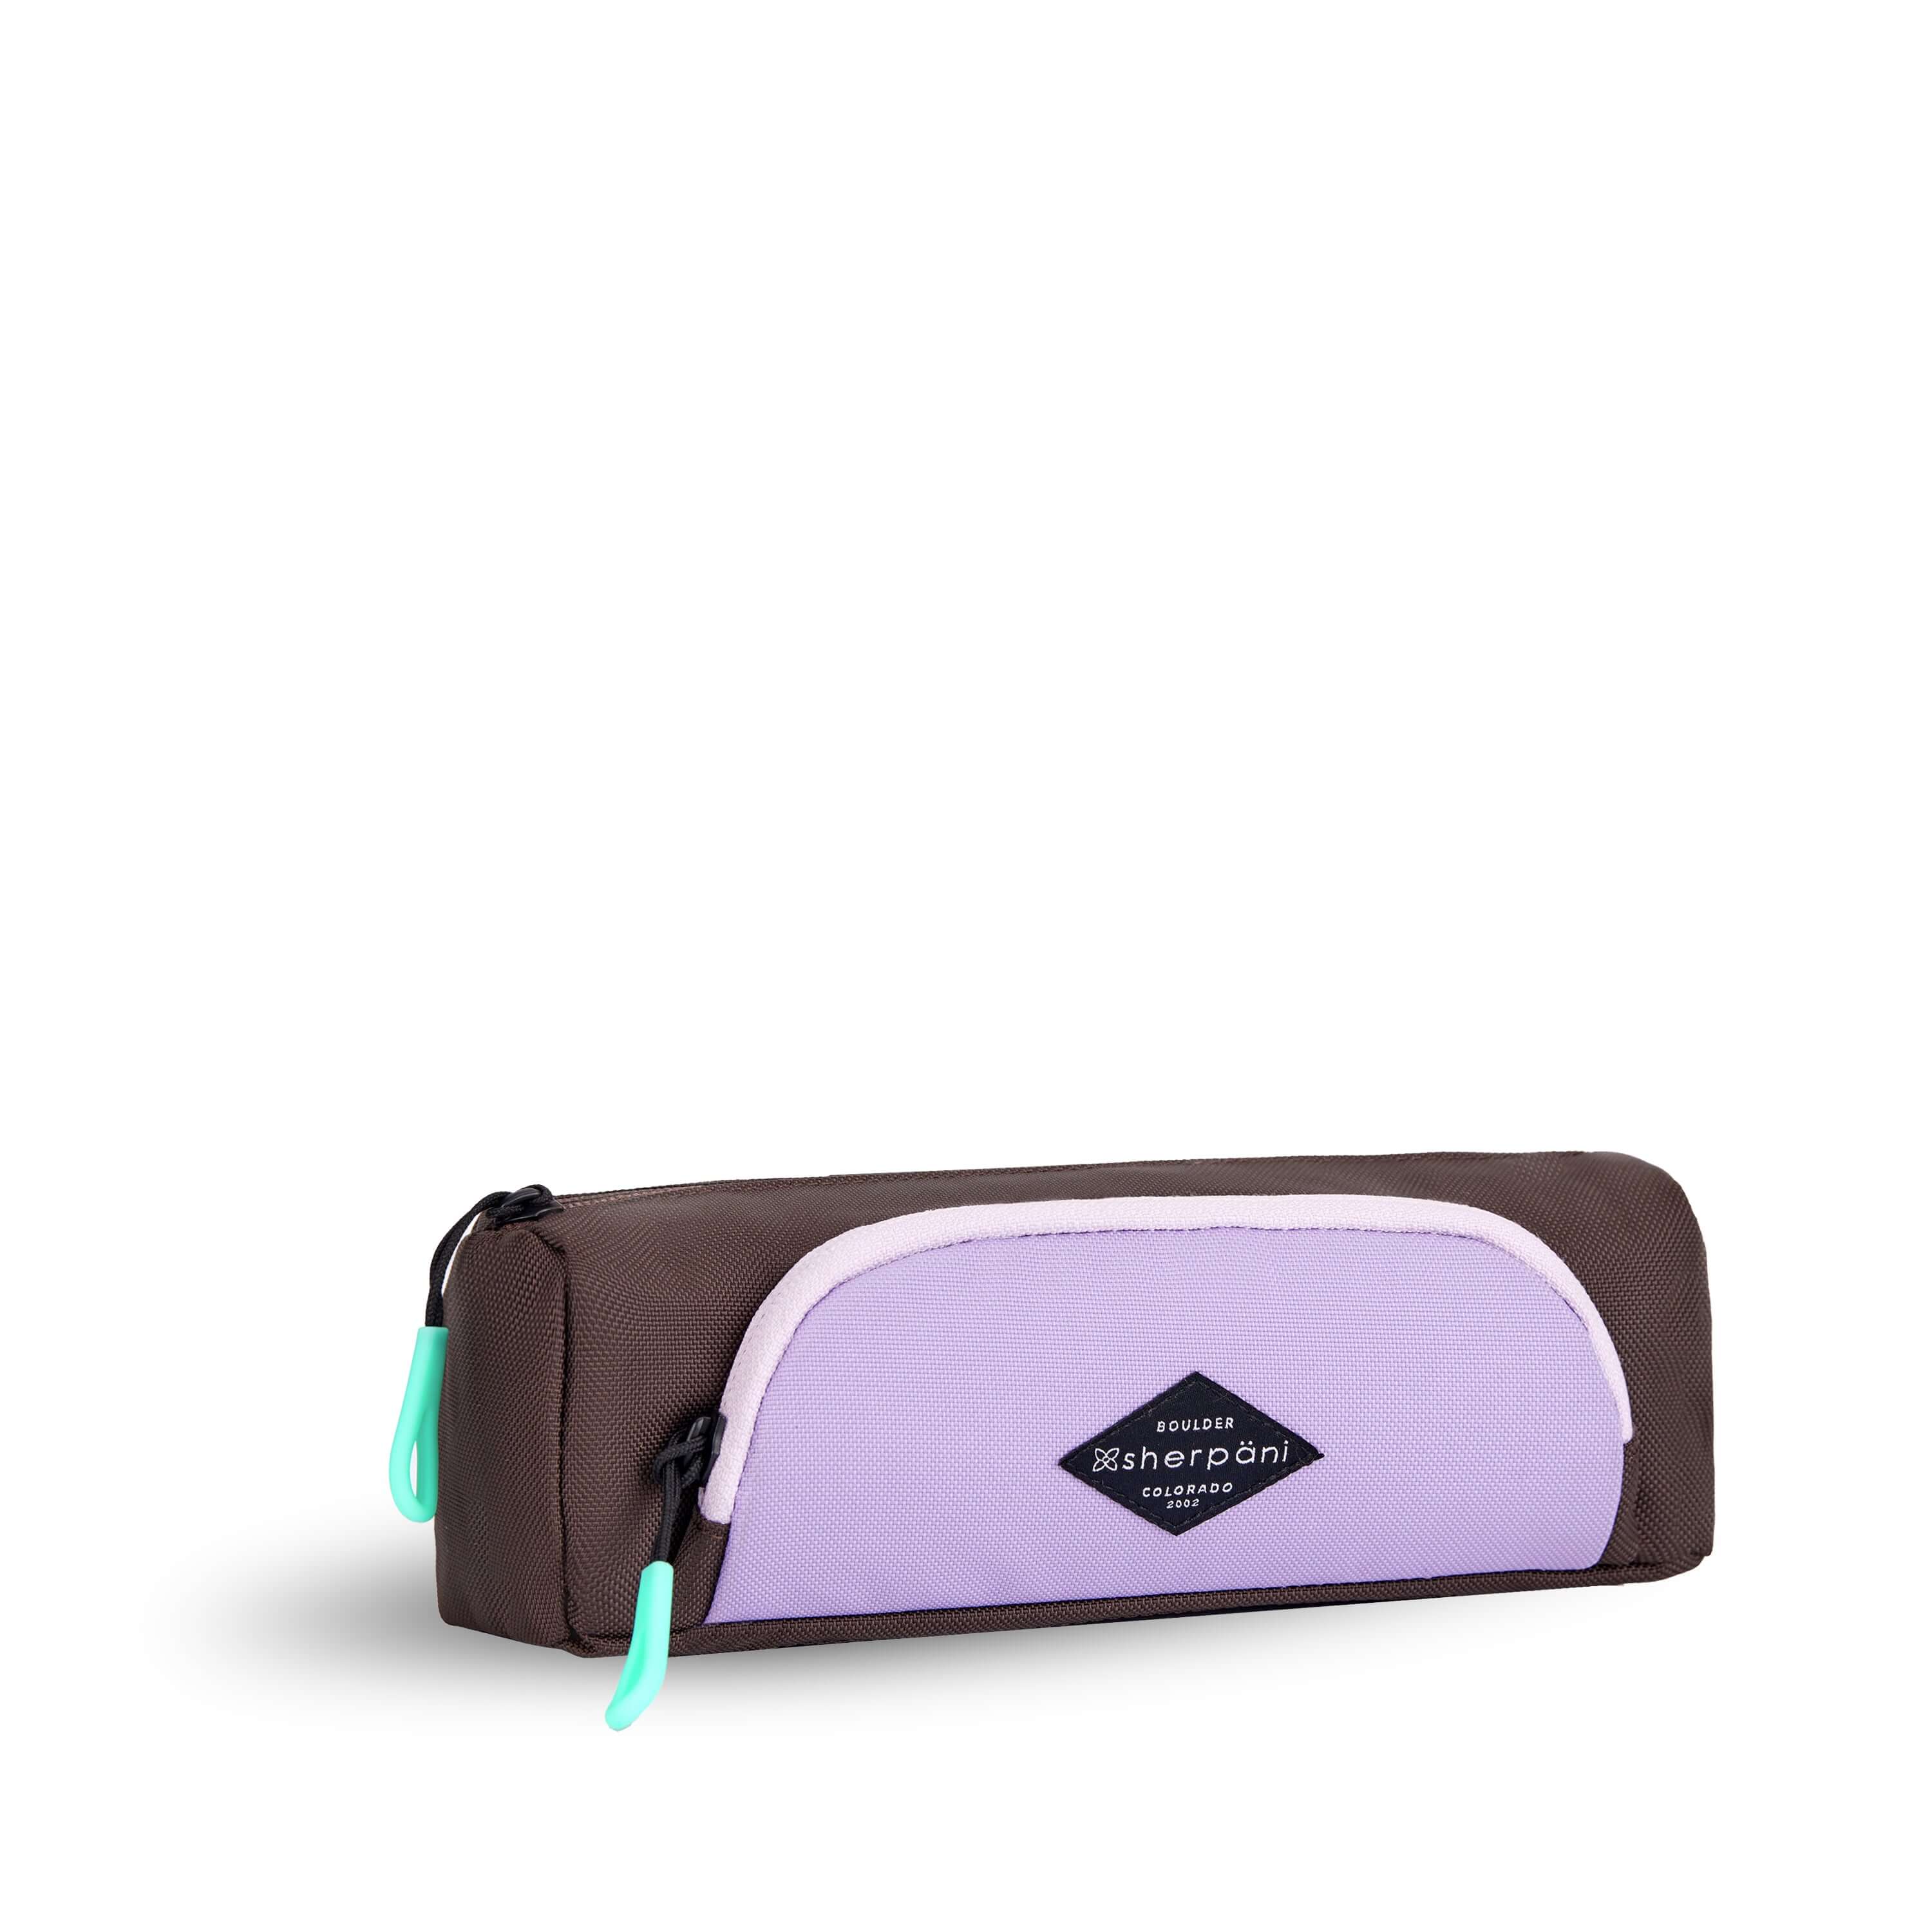 Angled front view of Sherpani travel accessory, the Poet in Lavender. The pouch is two-toned in lavender and brown. There is an external zipper pocket on the front. Easy-pull zippers are accented in aqua. #color_seagreen